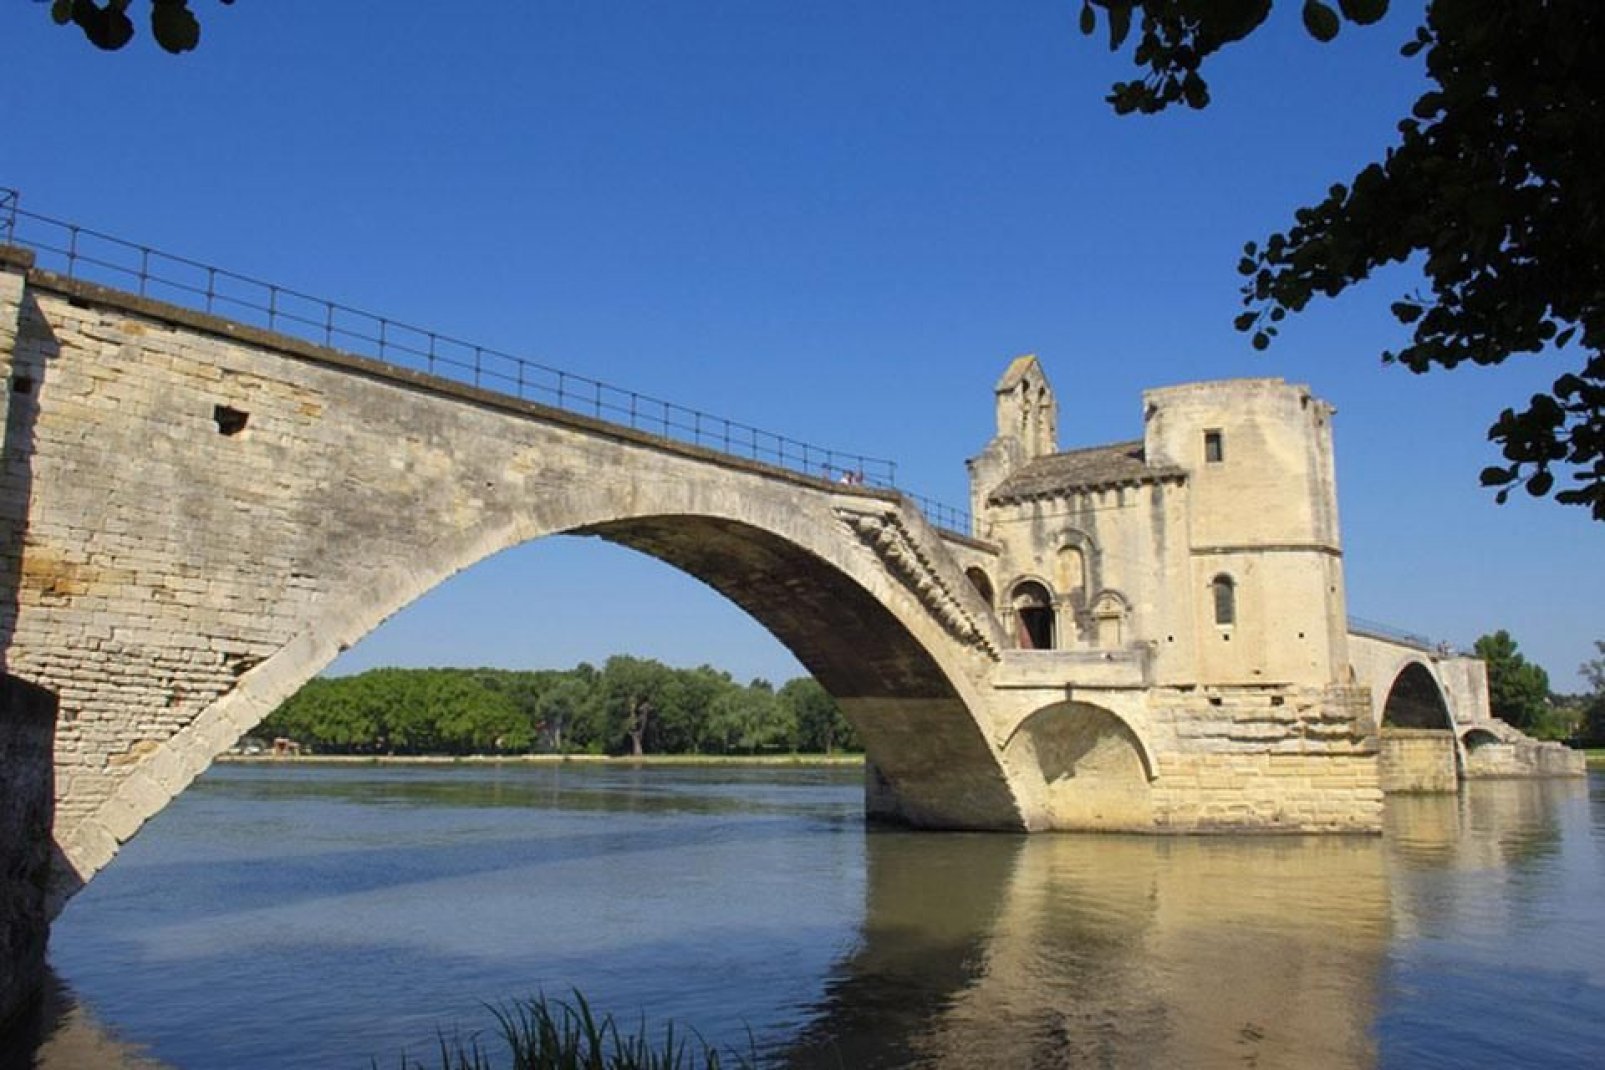 The famous Pont d'Avignon bridge (yes - the one in the song) is actually called the Pont Saint-Bénézet and was completed 1185.